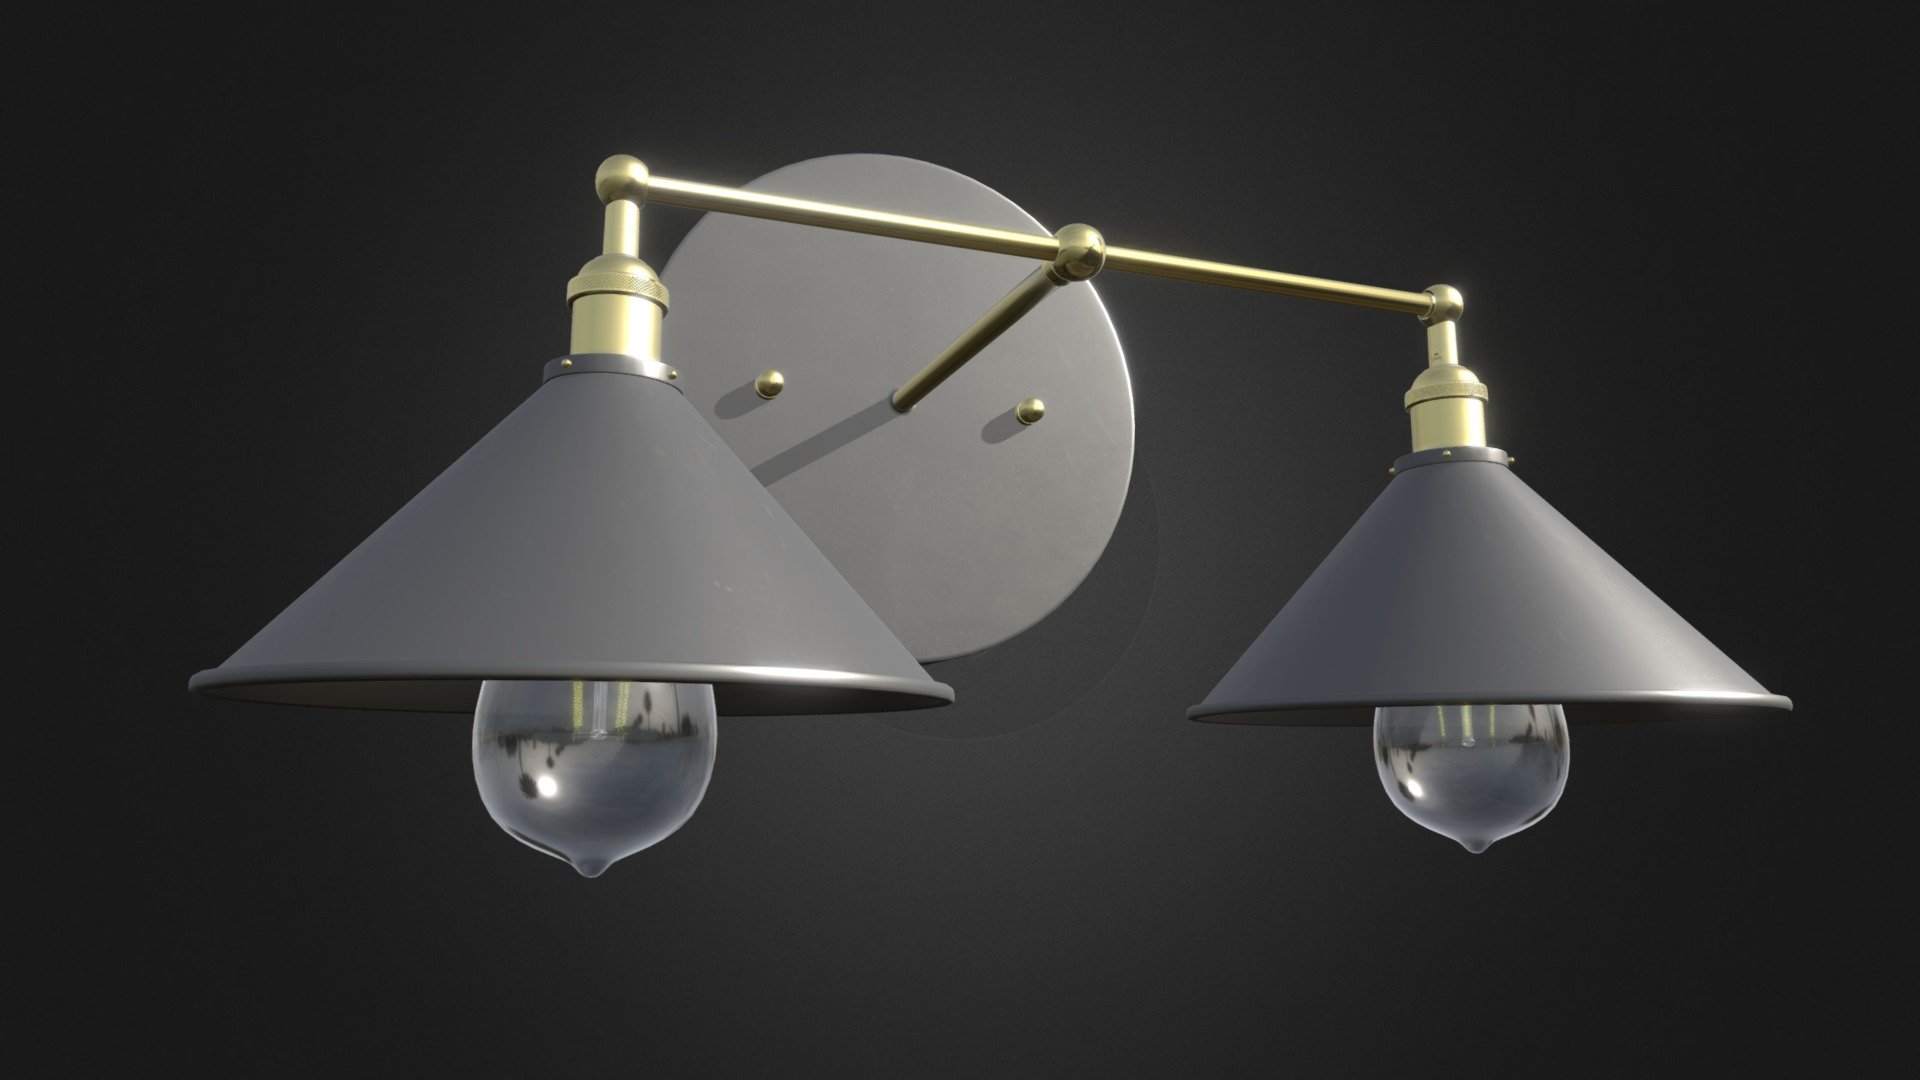 This is a great Lamp that you can use to ambient your Archviz Projects. It counts with a detailed bulb and a glossiness map to create variance its surface. Ideal for Industrial Style!.

Files with the lights on and off are included only for 3DSMax with VRay.

The model comes as a single Editable Poly properly named with all the materials assigned to each element and positioned in the center of the coordinate system.

It is great to make more attractive your renders!.

It is part of AXES Lamps Collection.



Polygons: 308660 
Vertices: 310539



.RAR Includes:




3dsmax 2017 with VRay 3.6 

3dsmax 2014 with VRay 3.6 

FBX 

OBJ



Textures:

G_BlackMetal.jpg 
G_BasePlateBlackMetal.jpg - AXES Wall Lamp 3 - Buy Royalty Free 3D model by Ricardo Salas (@ricardo.salas.cg) 3d model